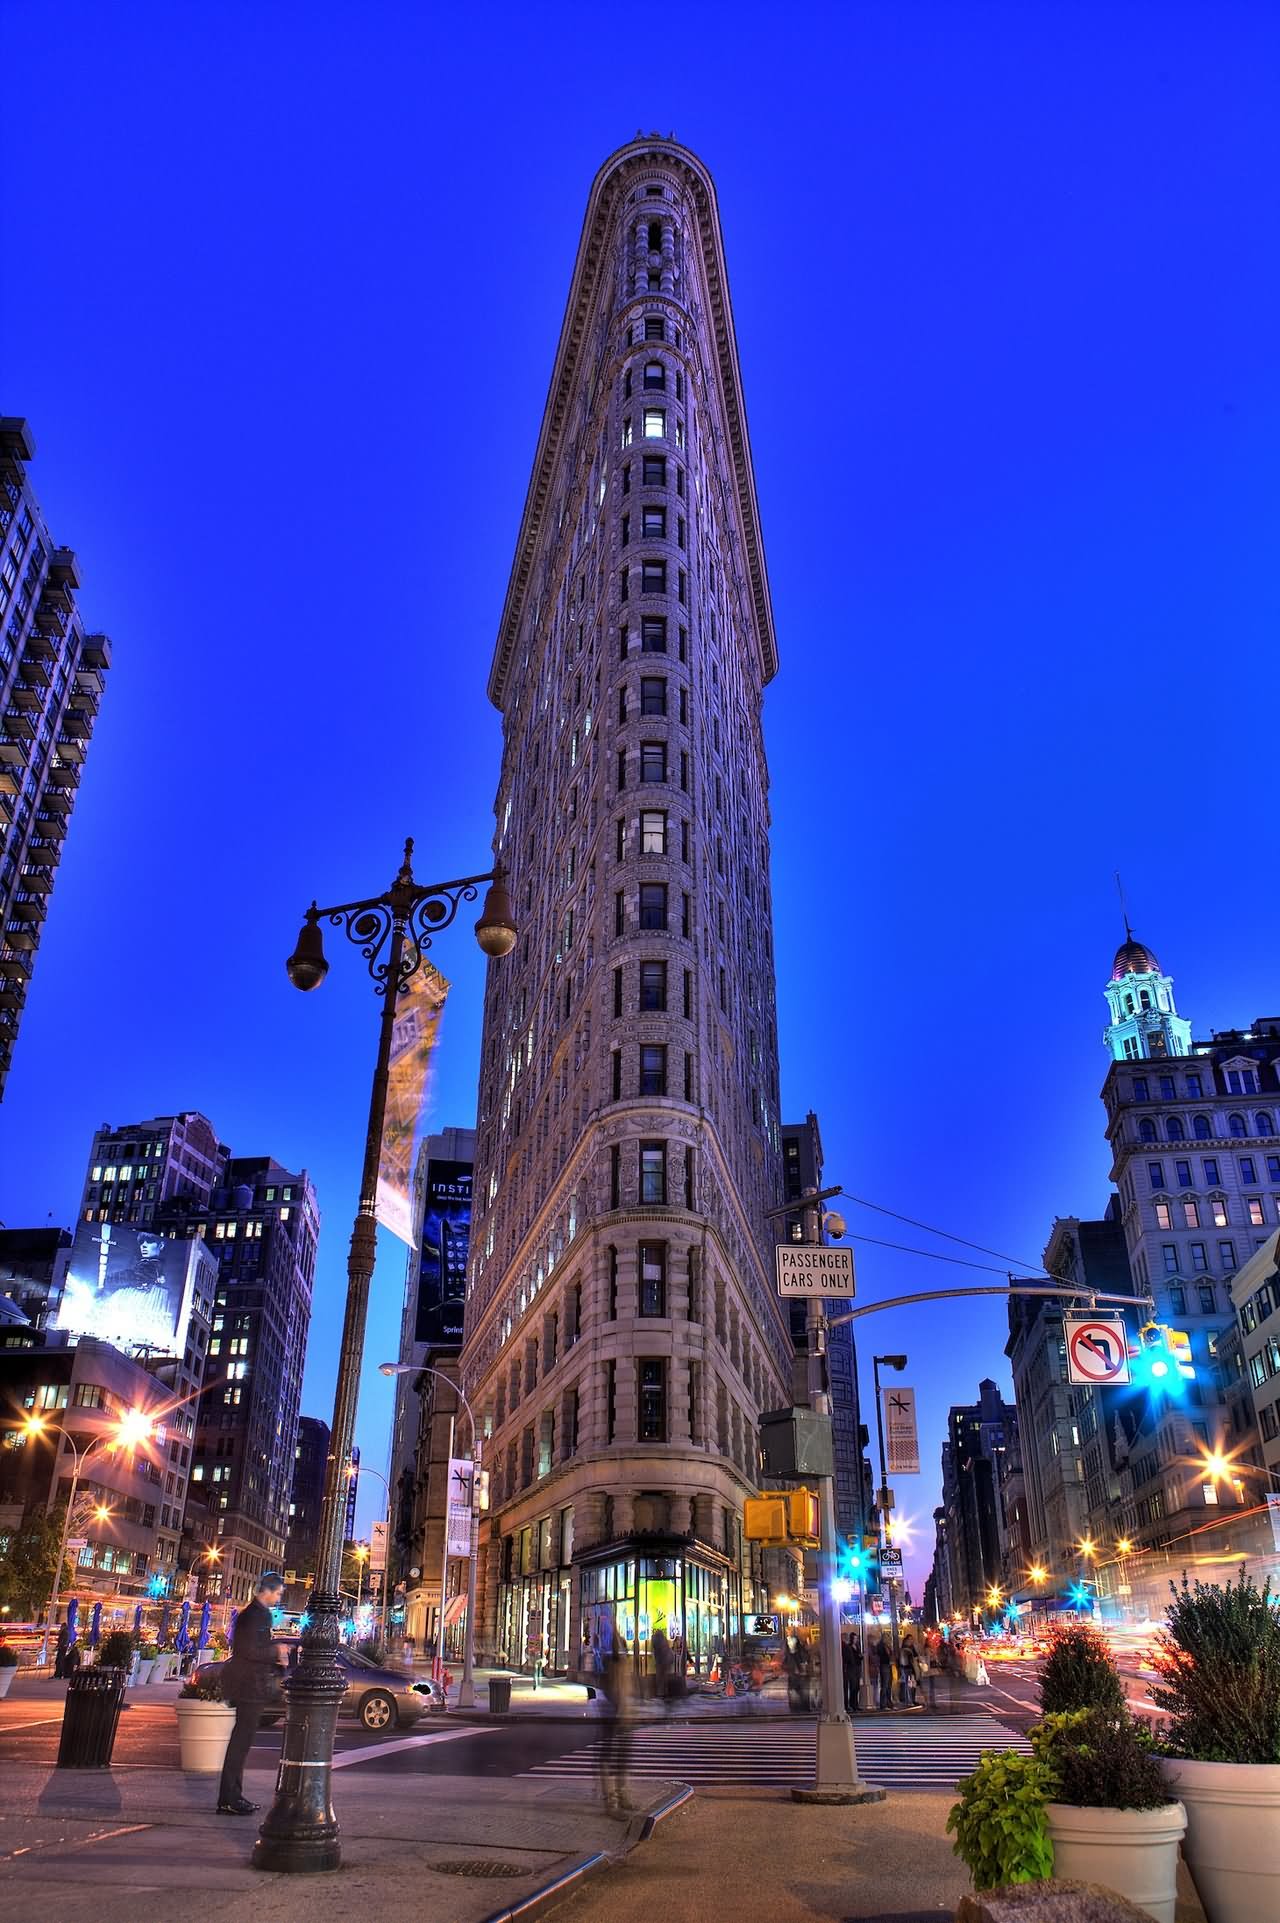 35 Incredible Night View Pictures Of Flatiron Building, New York Pictures